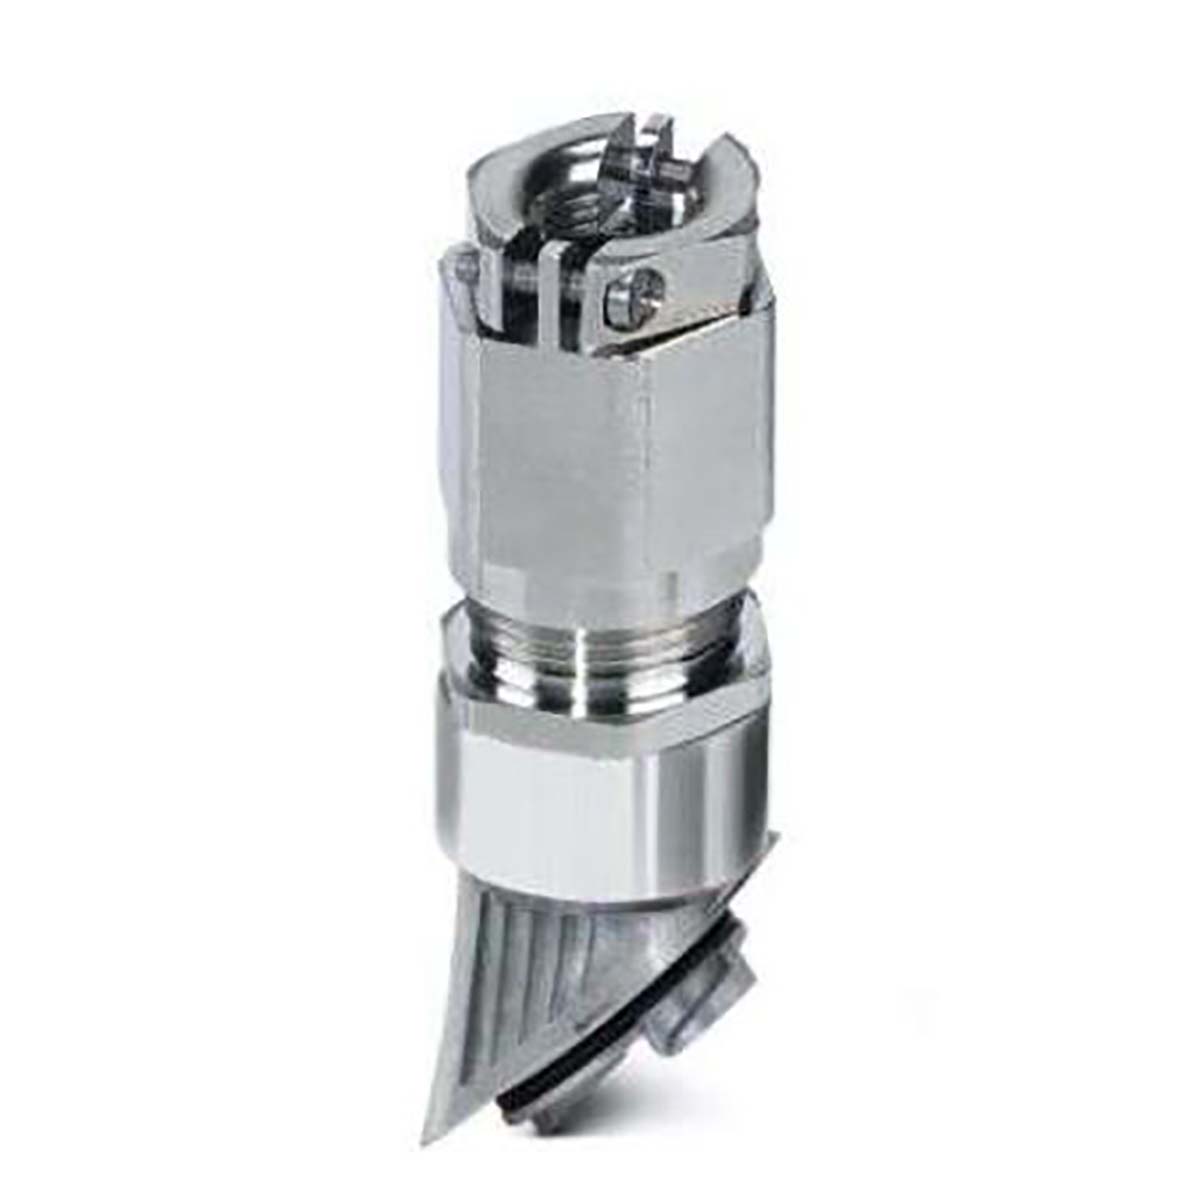 Phoenix Contact  HC-B-GTRS Series Silver Nickel Plated Brass Cable Gland, M40 Thread, 16mm Min, 28mm Max, IP66, IP67